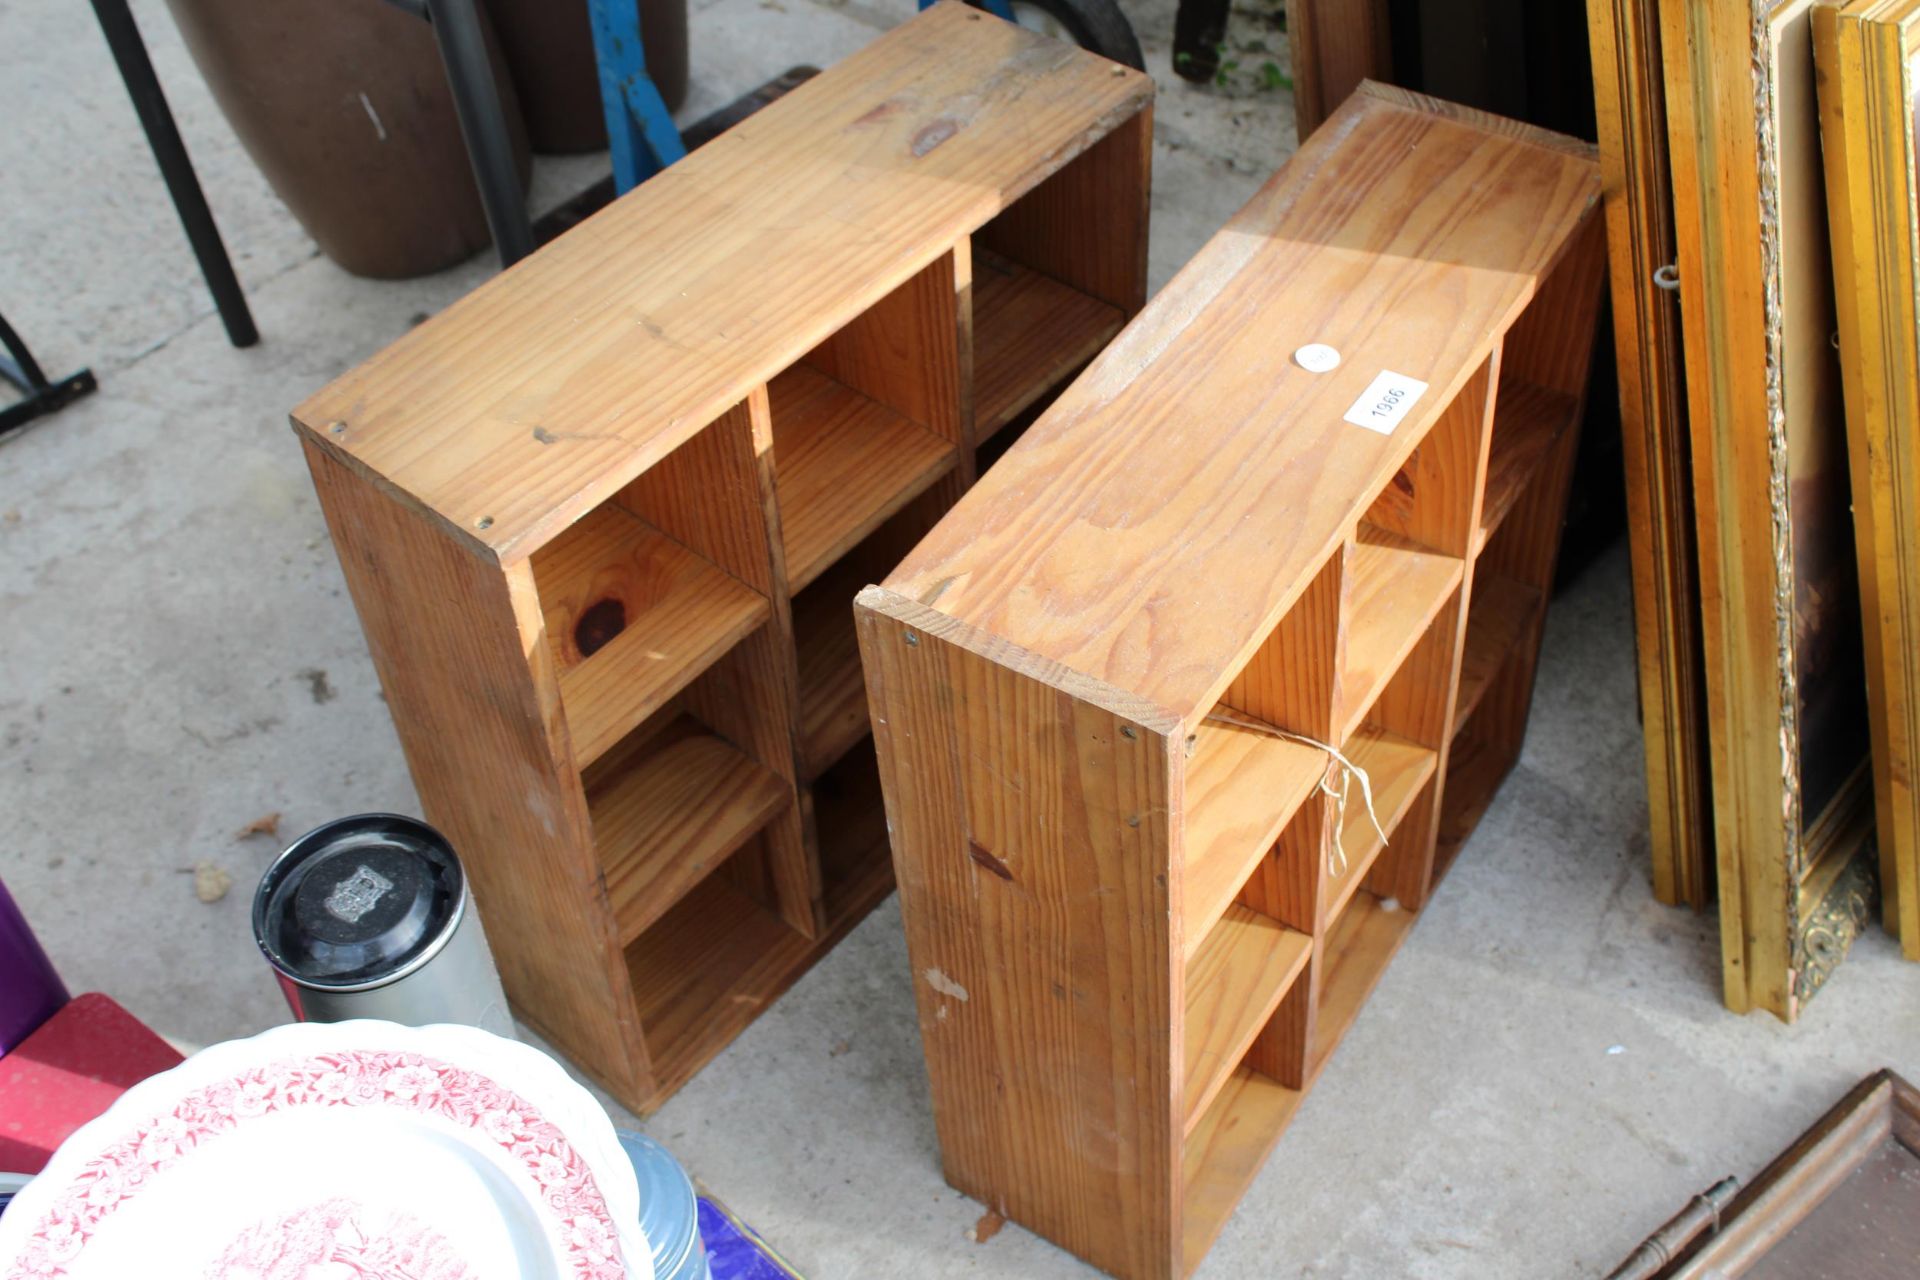 A VINTAGE TWIN HANDLED WOODEN TRAY AND TWO PIGEON HOLE UNITS - Image 3 of 3